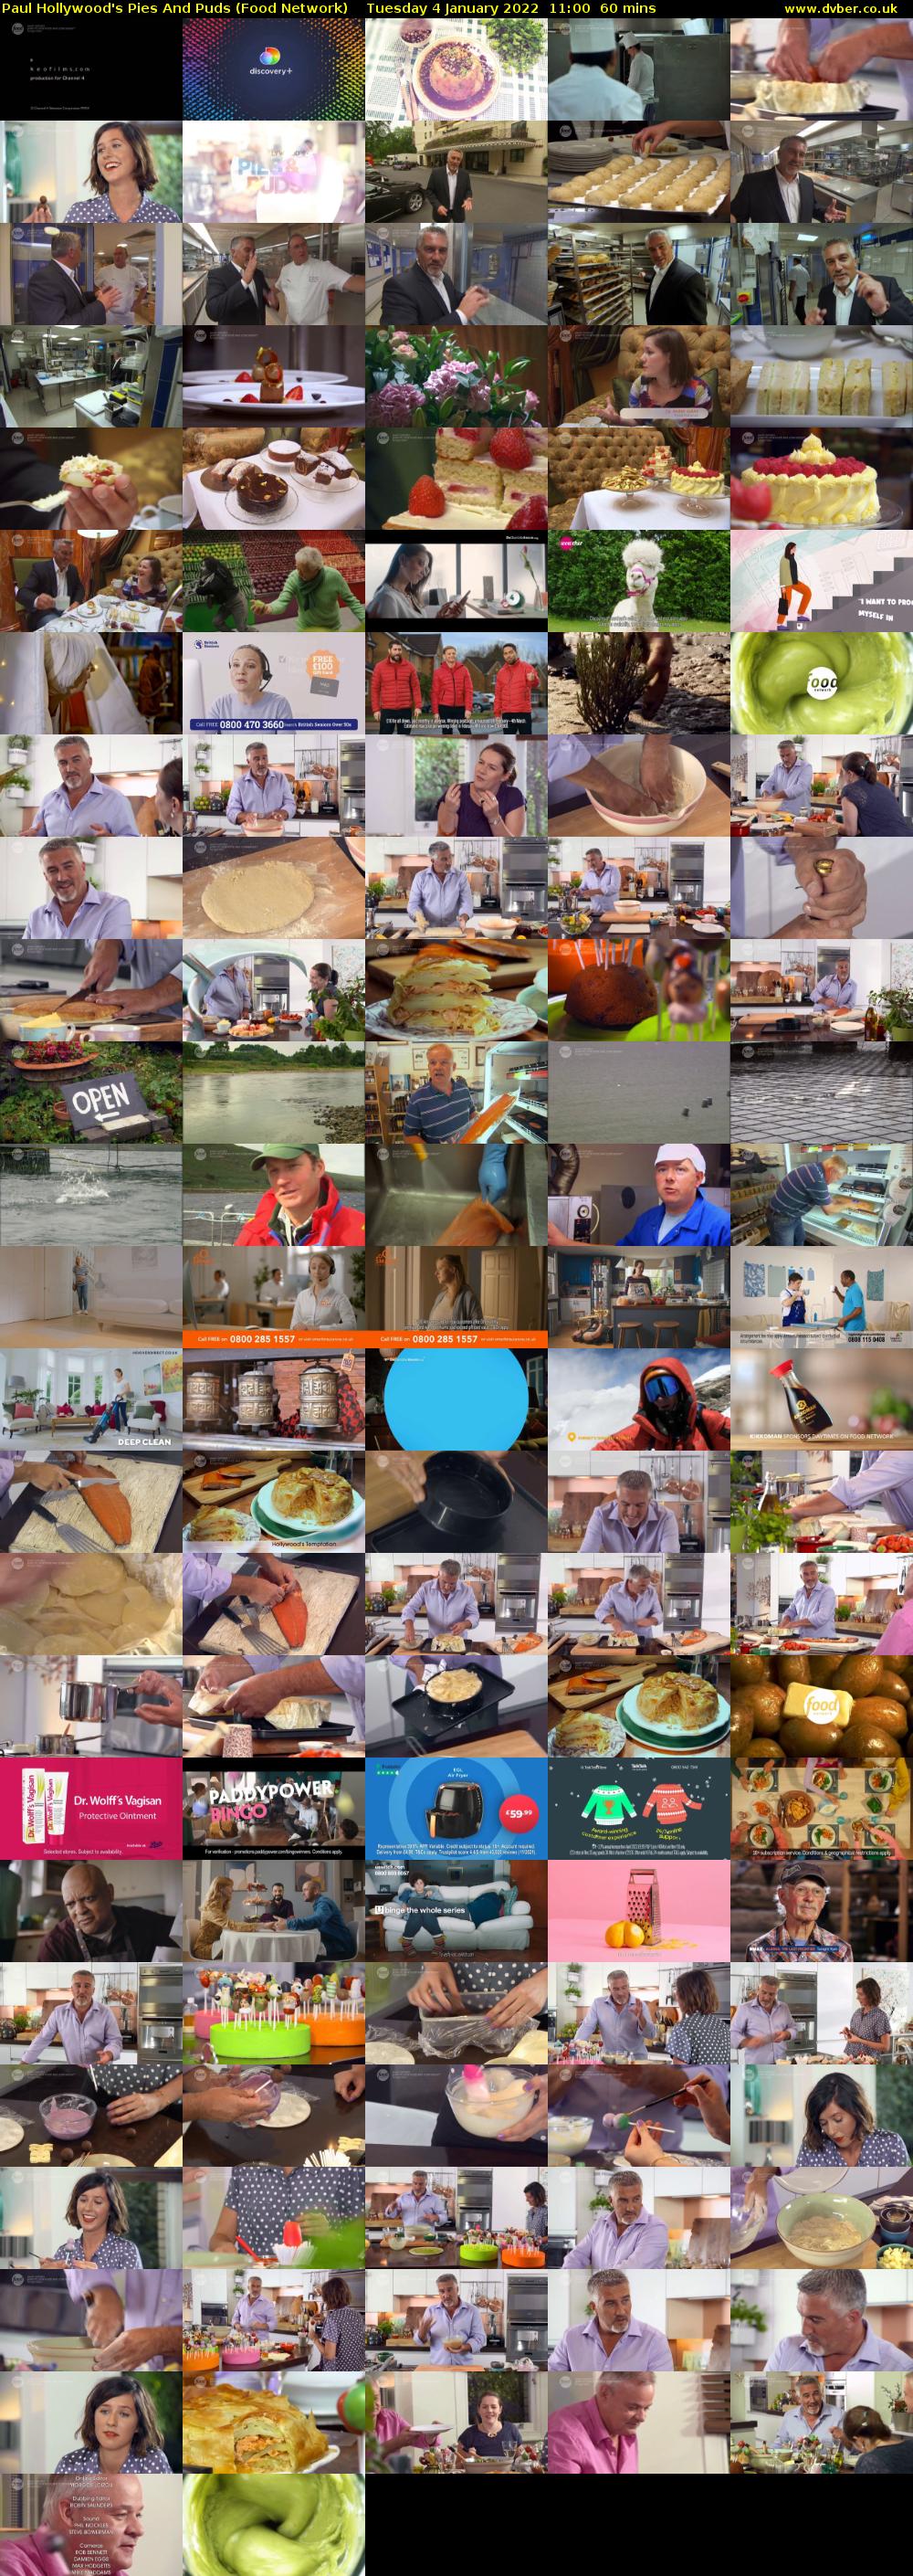 Paul Hollywood's Pies And Puds (Food Network) Tuesday 4 January 2022 11:00 - 12:00